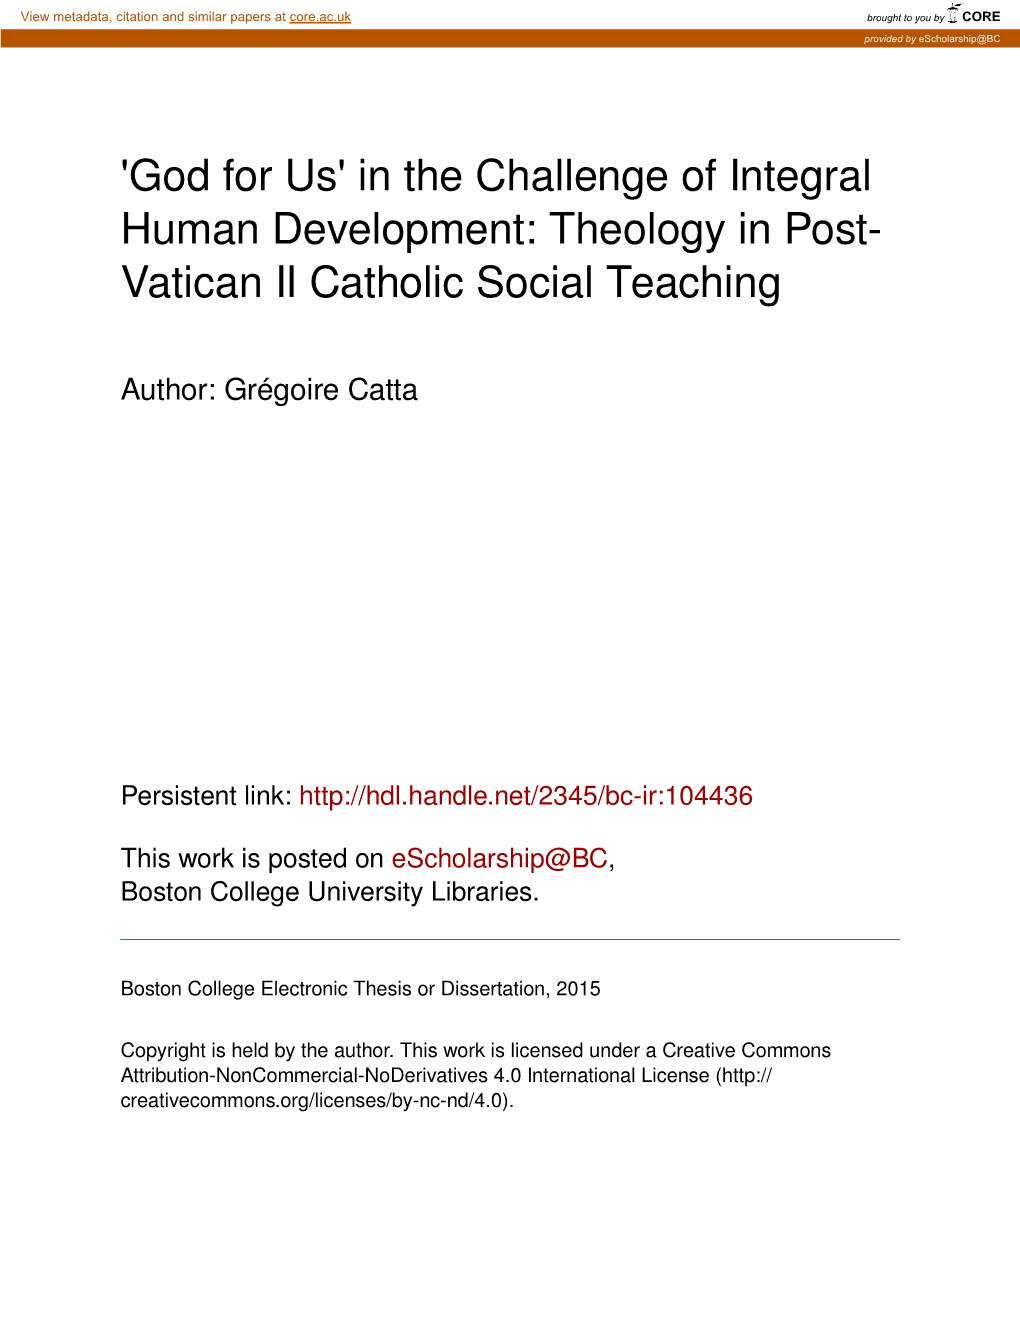 In the Challenge of Integral Human Development: Theology in Post- Vatican II Catholic Social Teaching